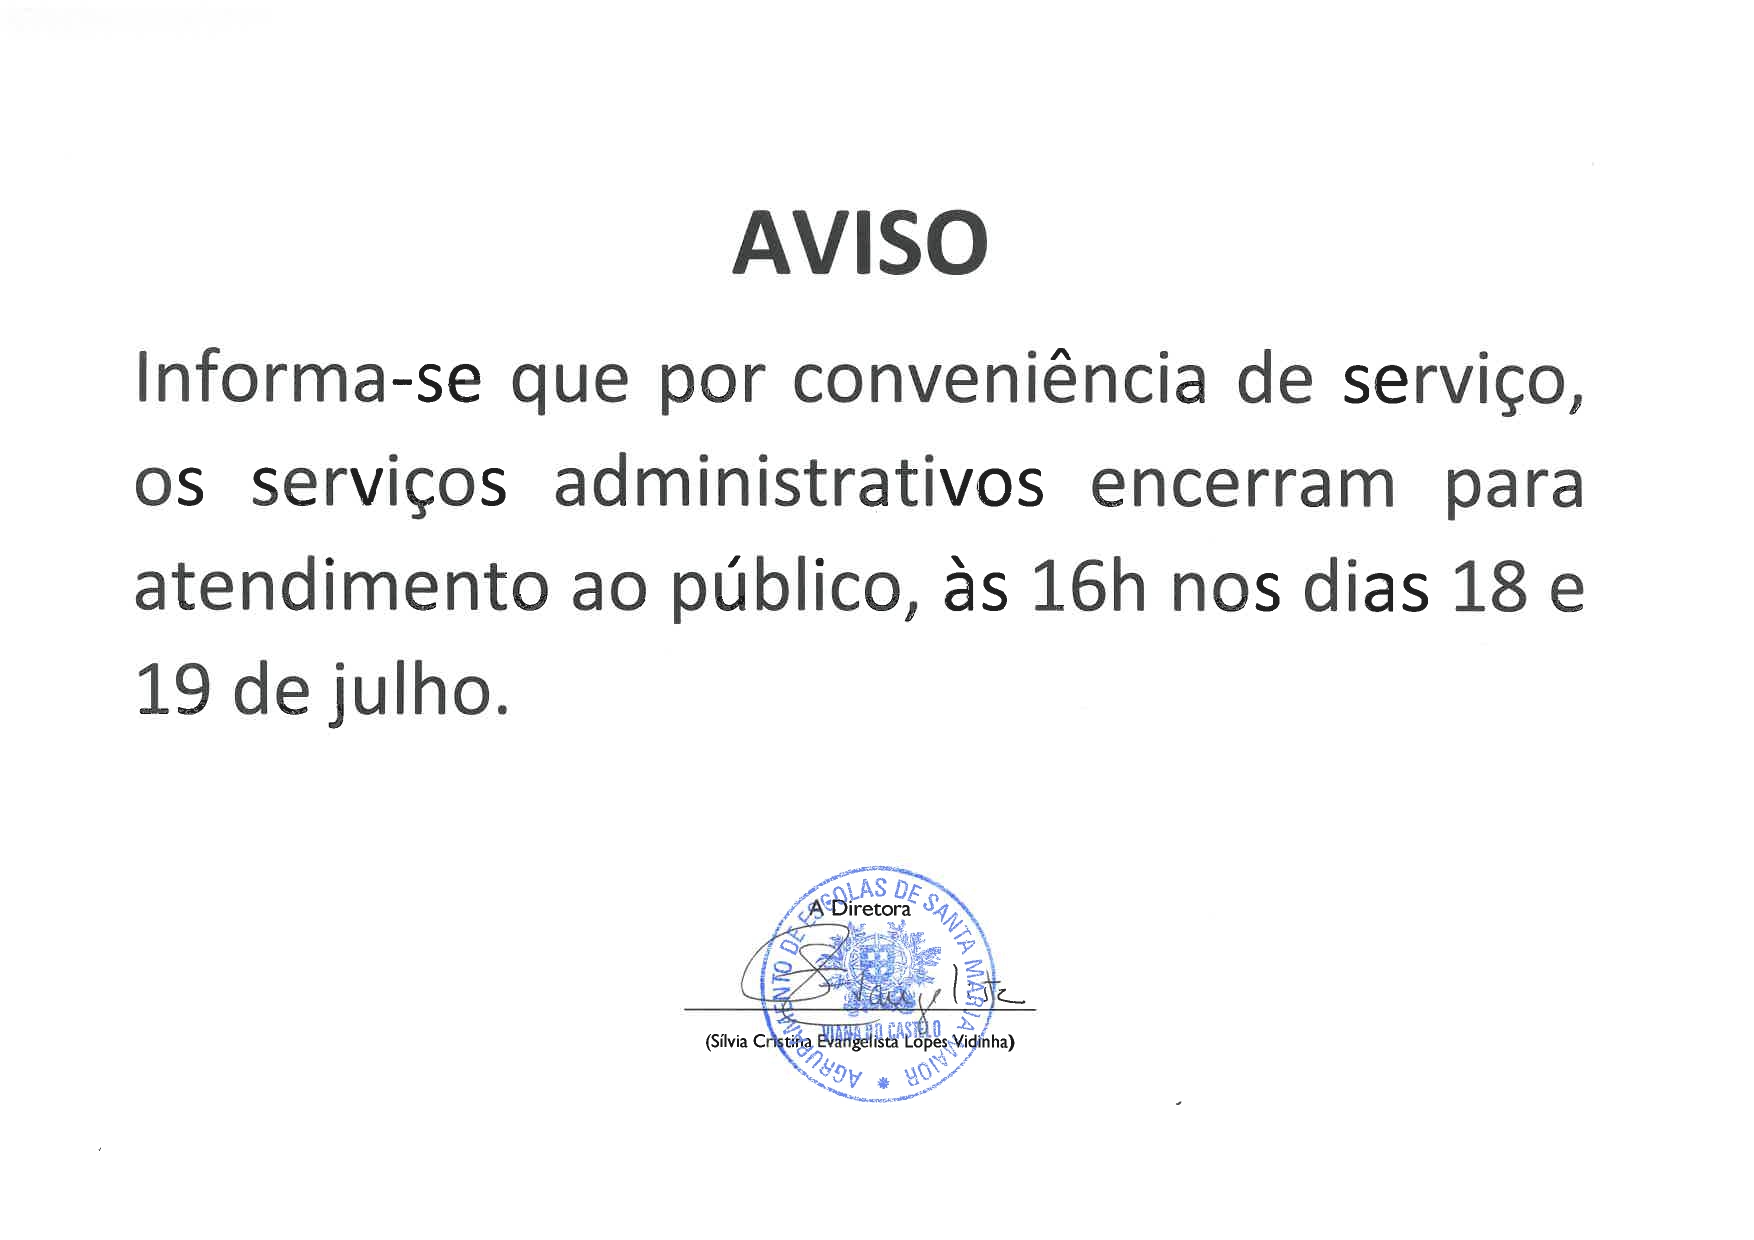 Aviso pages to jpg 0001